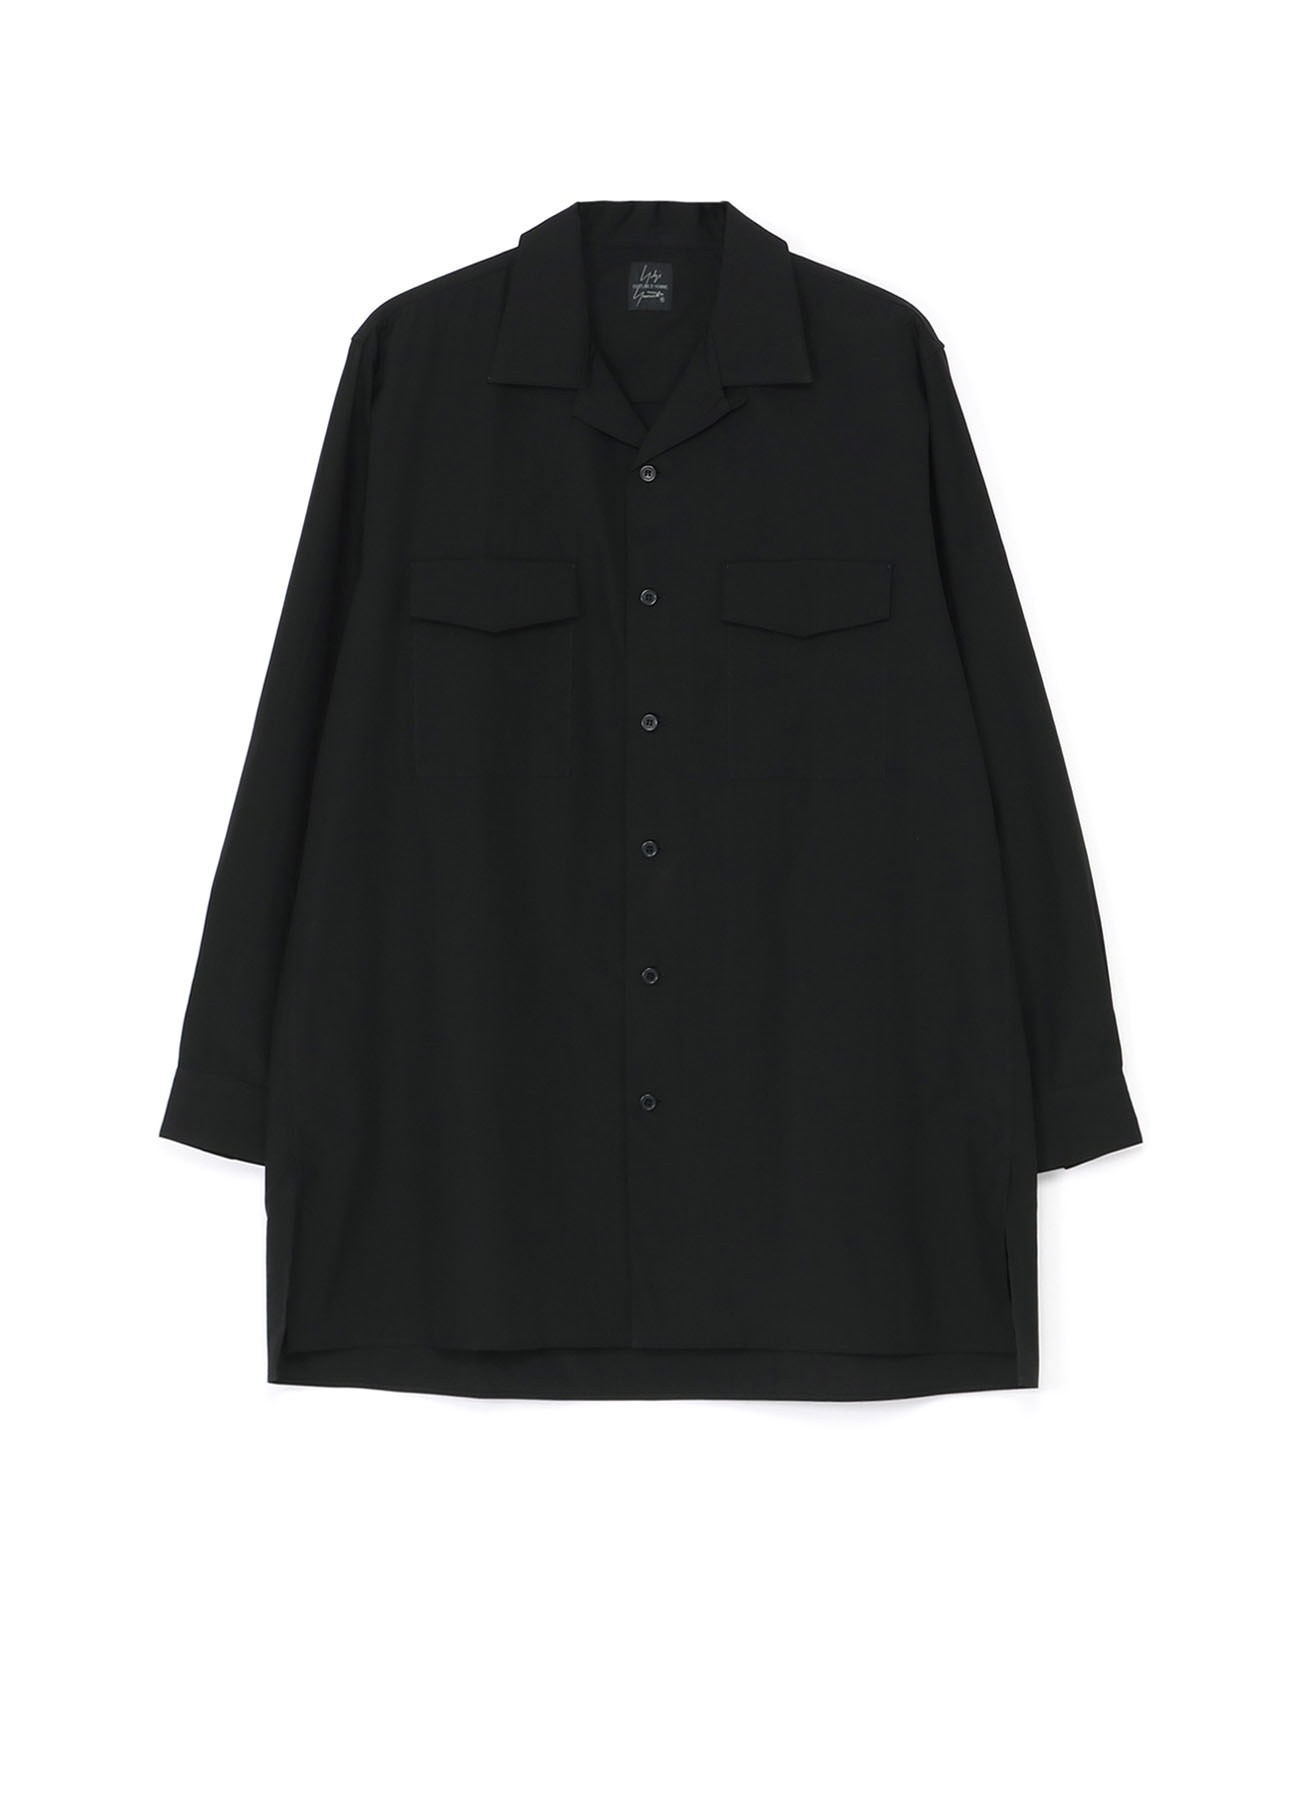 CDH SUIT BROAD OPEN COLLAR SHIRTS